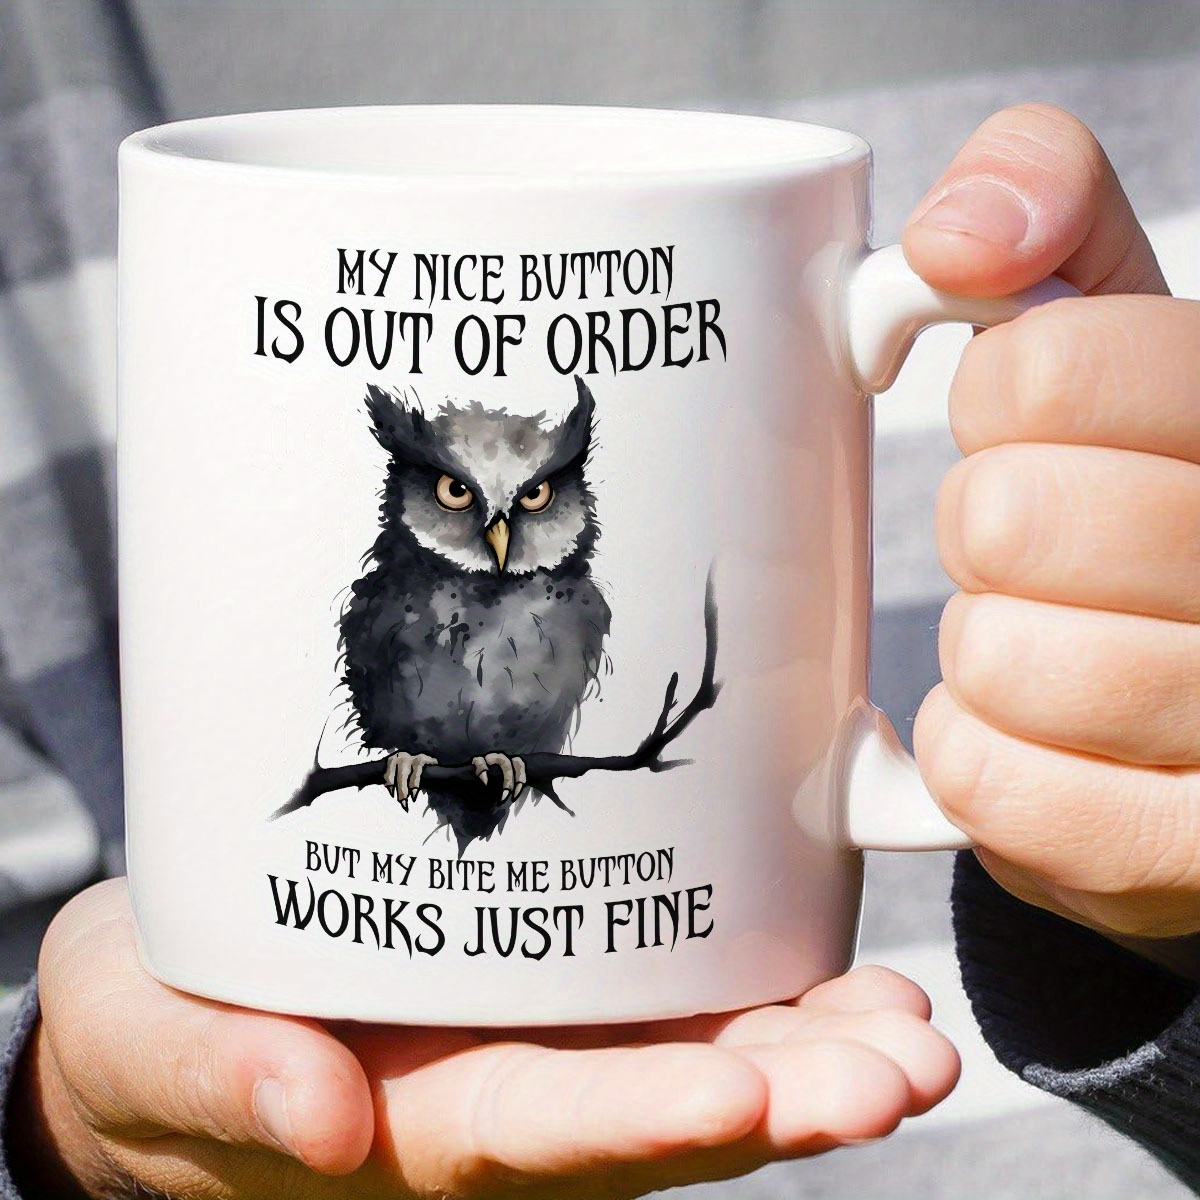 

Funny Owl Ceramic Coffee Mug - 11oz Insulated Reusable Cup With "my Nice Button Is Out Of Order" Humorous Quote - Gift For Owl Lovers, Multipurpose Machine-washable Mug For Hot And Cold Beverages